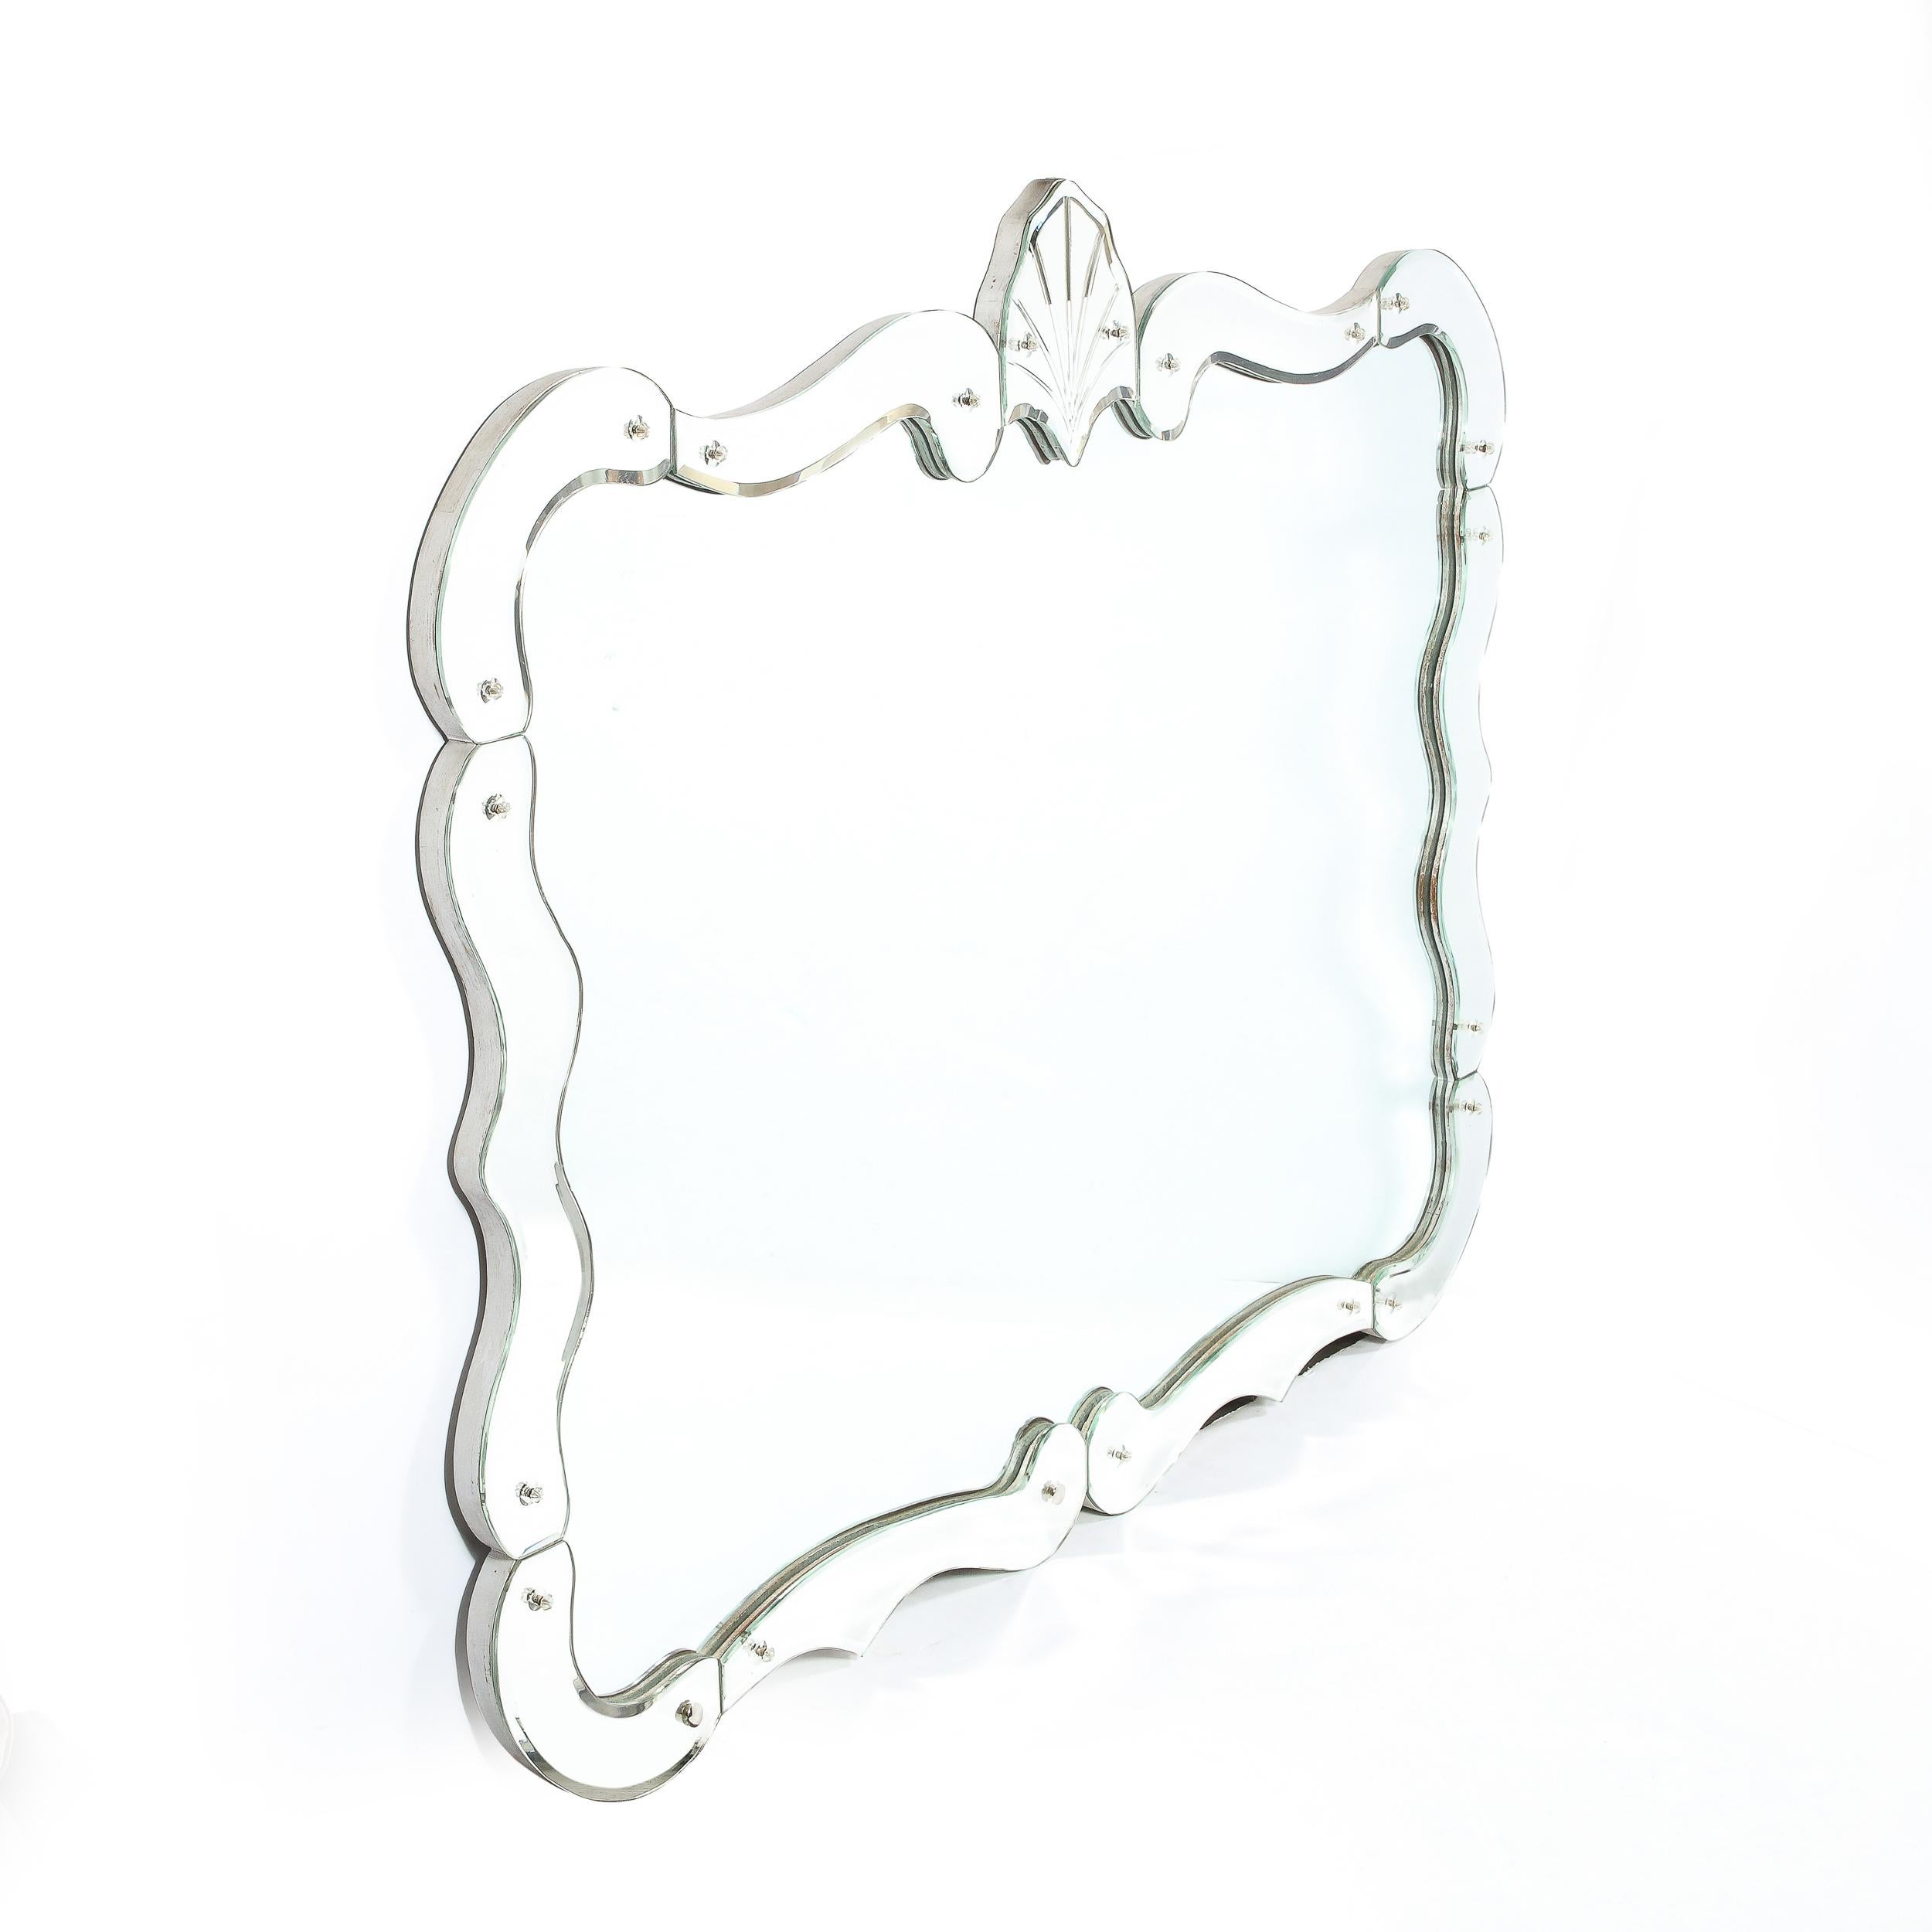 This elegant 1940s Hollywood mirror was realized in the United States circa 1940. It features a rectangular form with rounded edges and bevel detailing. The perimeter of the piece is decorated with undulating segments (also in plain mirror), secured